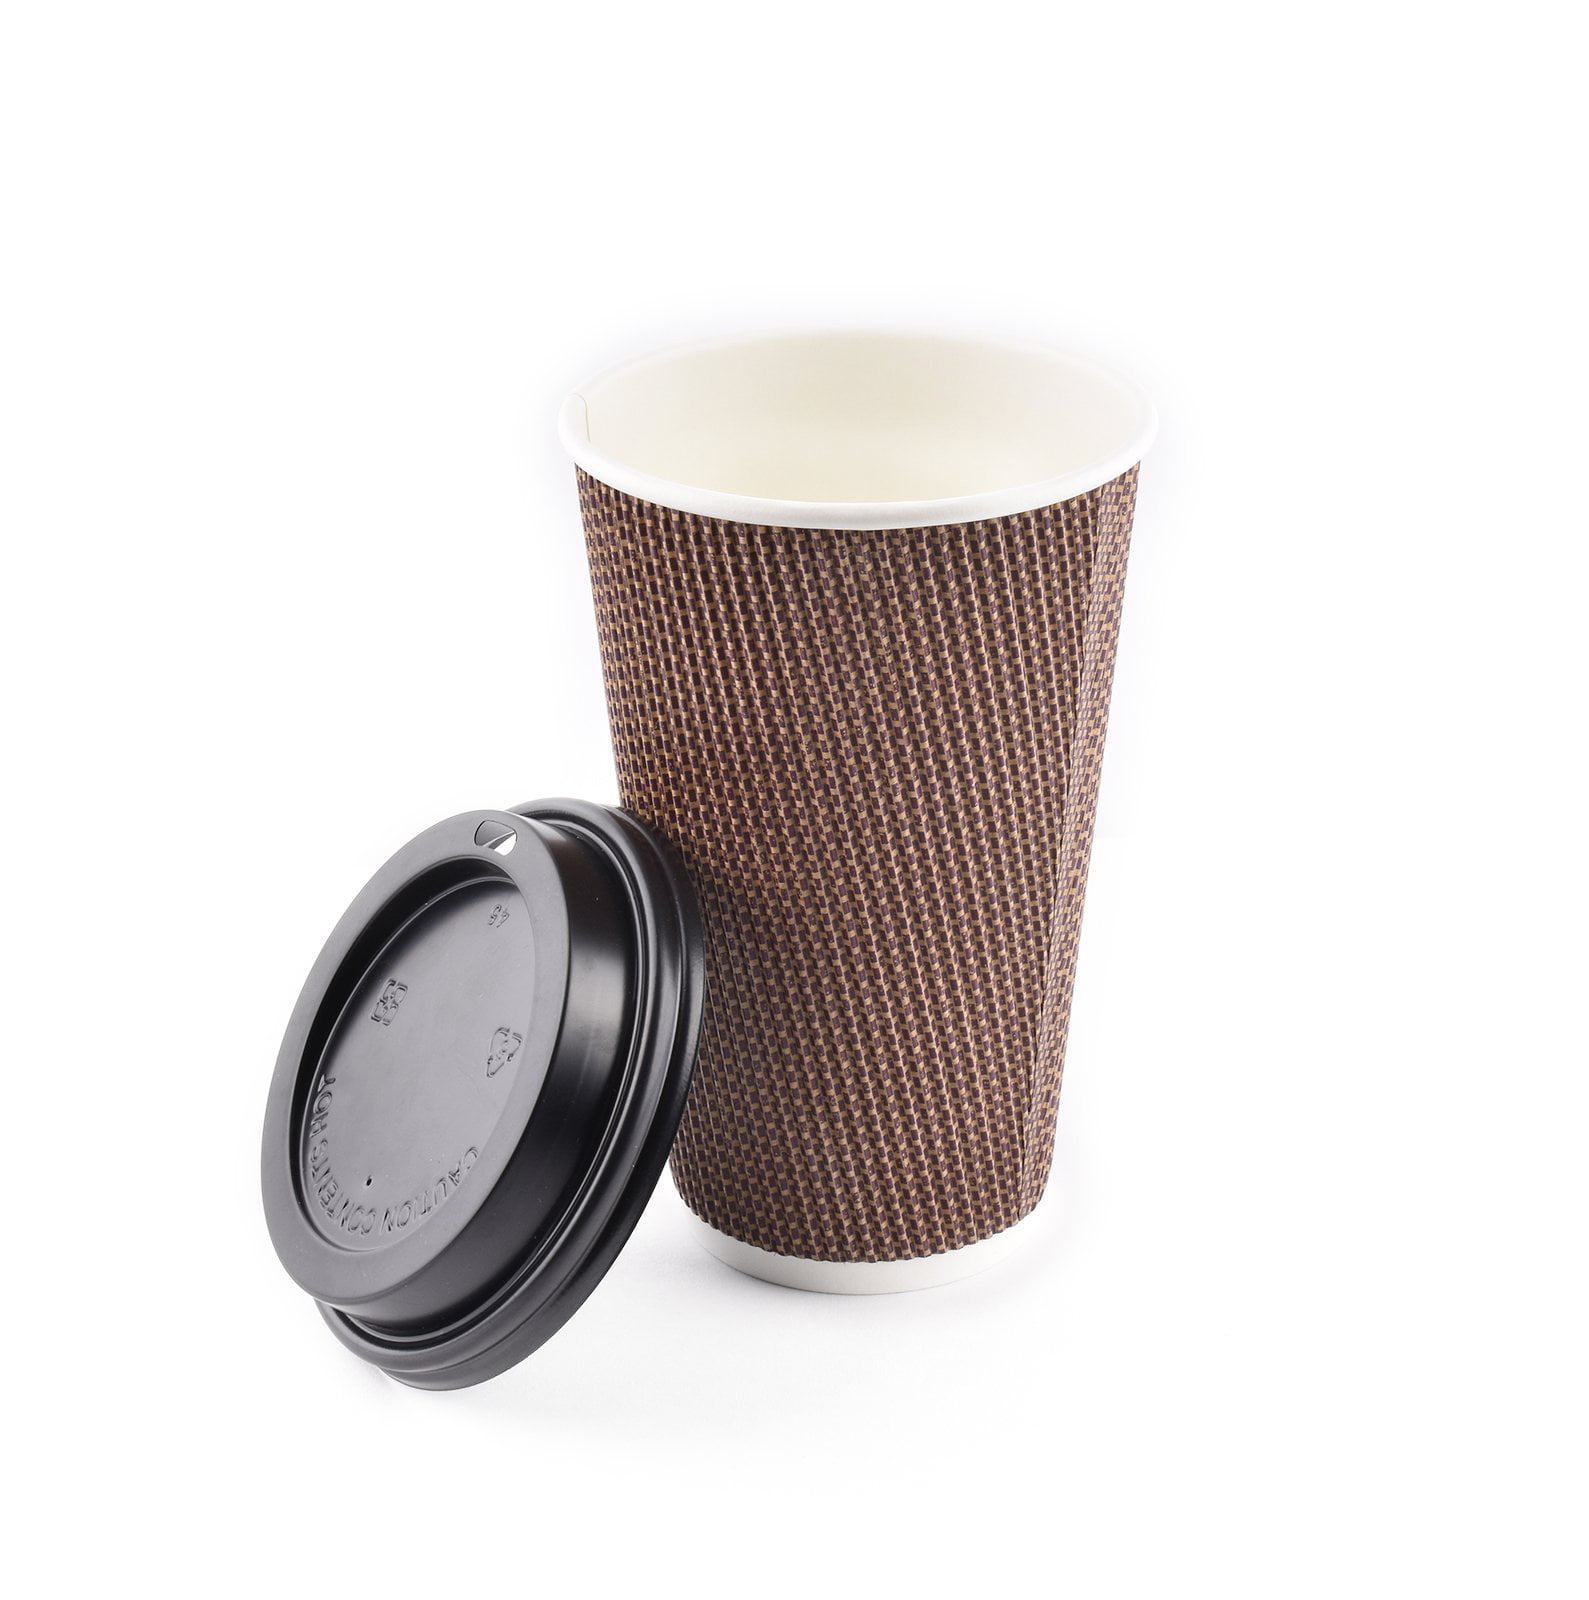 16 oz coffee cups with lids